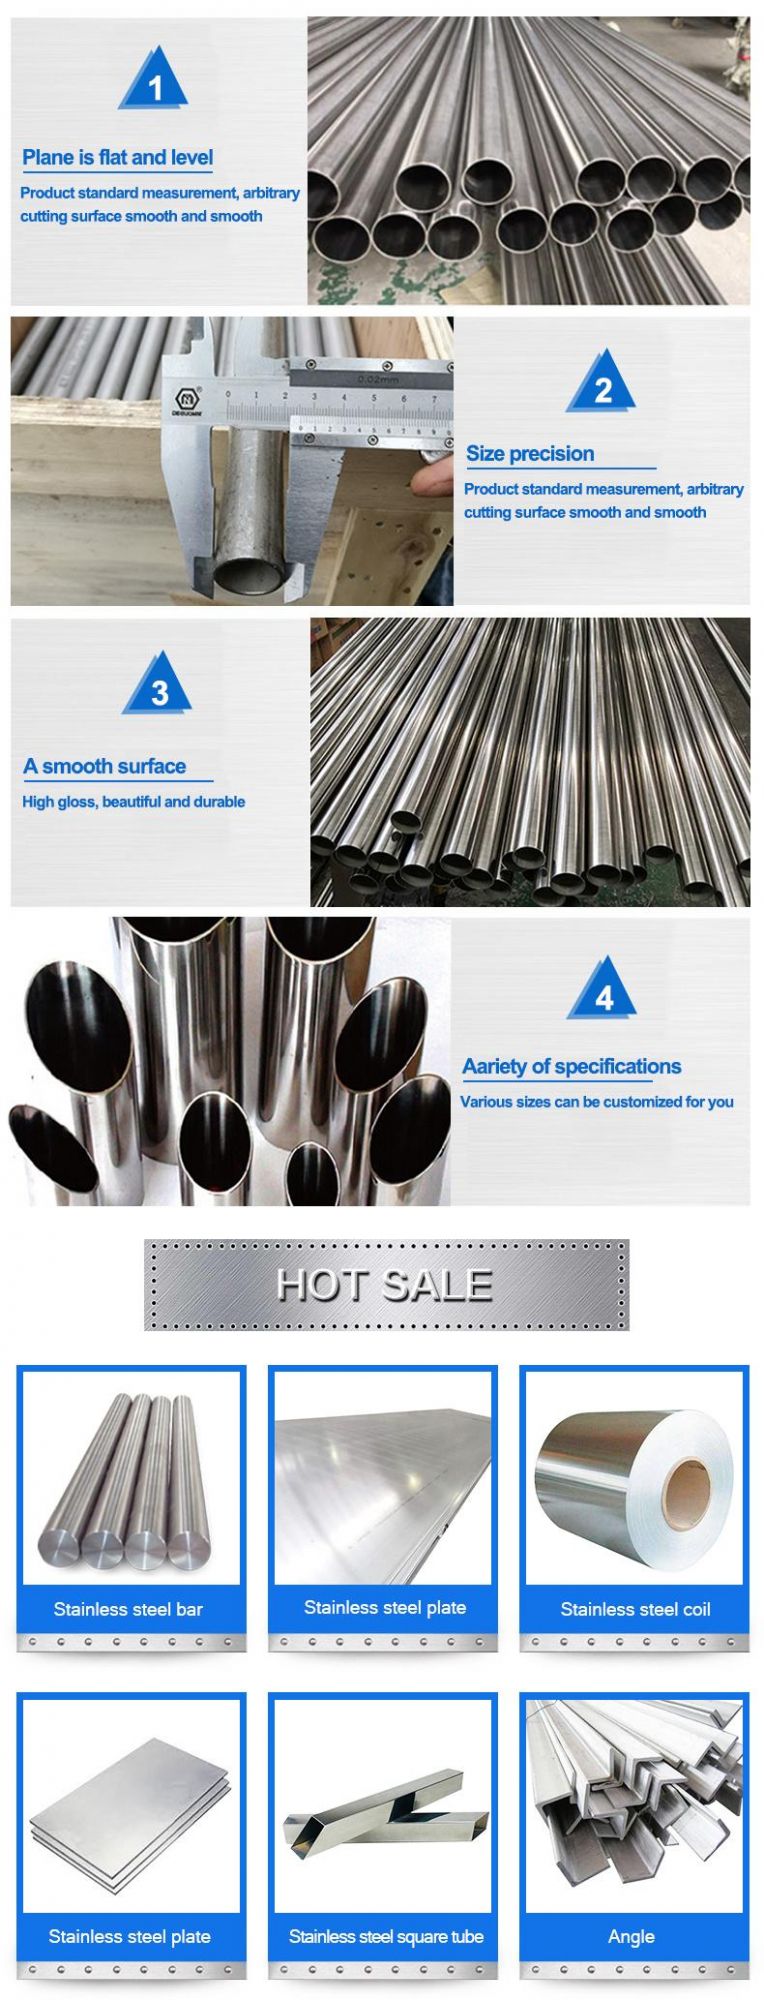 Cold/Hot Rolled Q195 Q235 Q235A Q235B Q345 Q345A Q345b 201 304 316 420 430 Steel Pipe/Carbon Steel/Galvanized/Chrome/Stainless Steel Seamless/Welded Pipe/Tube